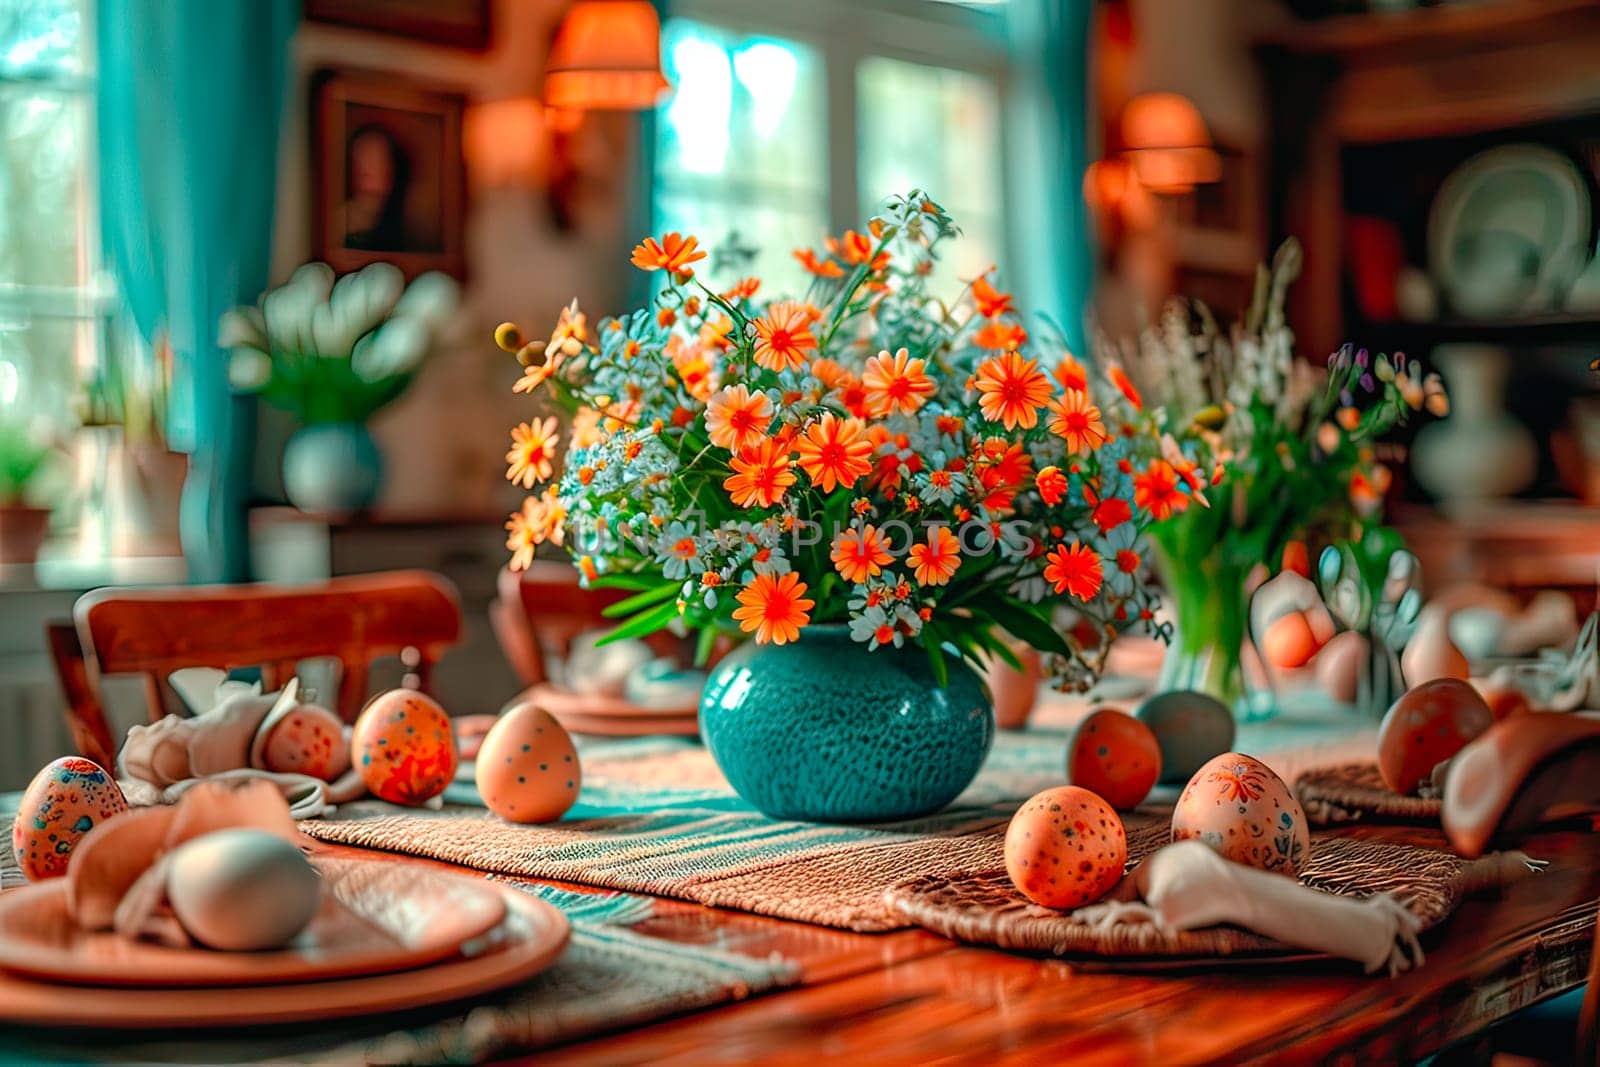 Setting the table for the family at the Easter celebration. by fotodrobik